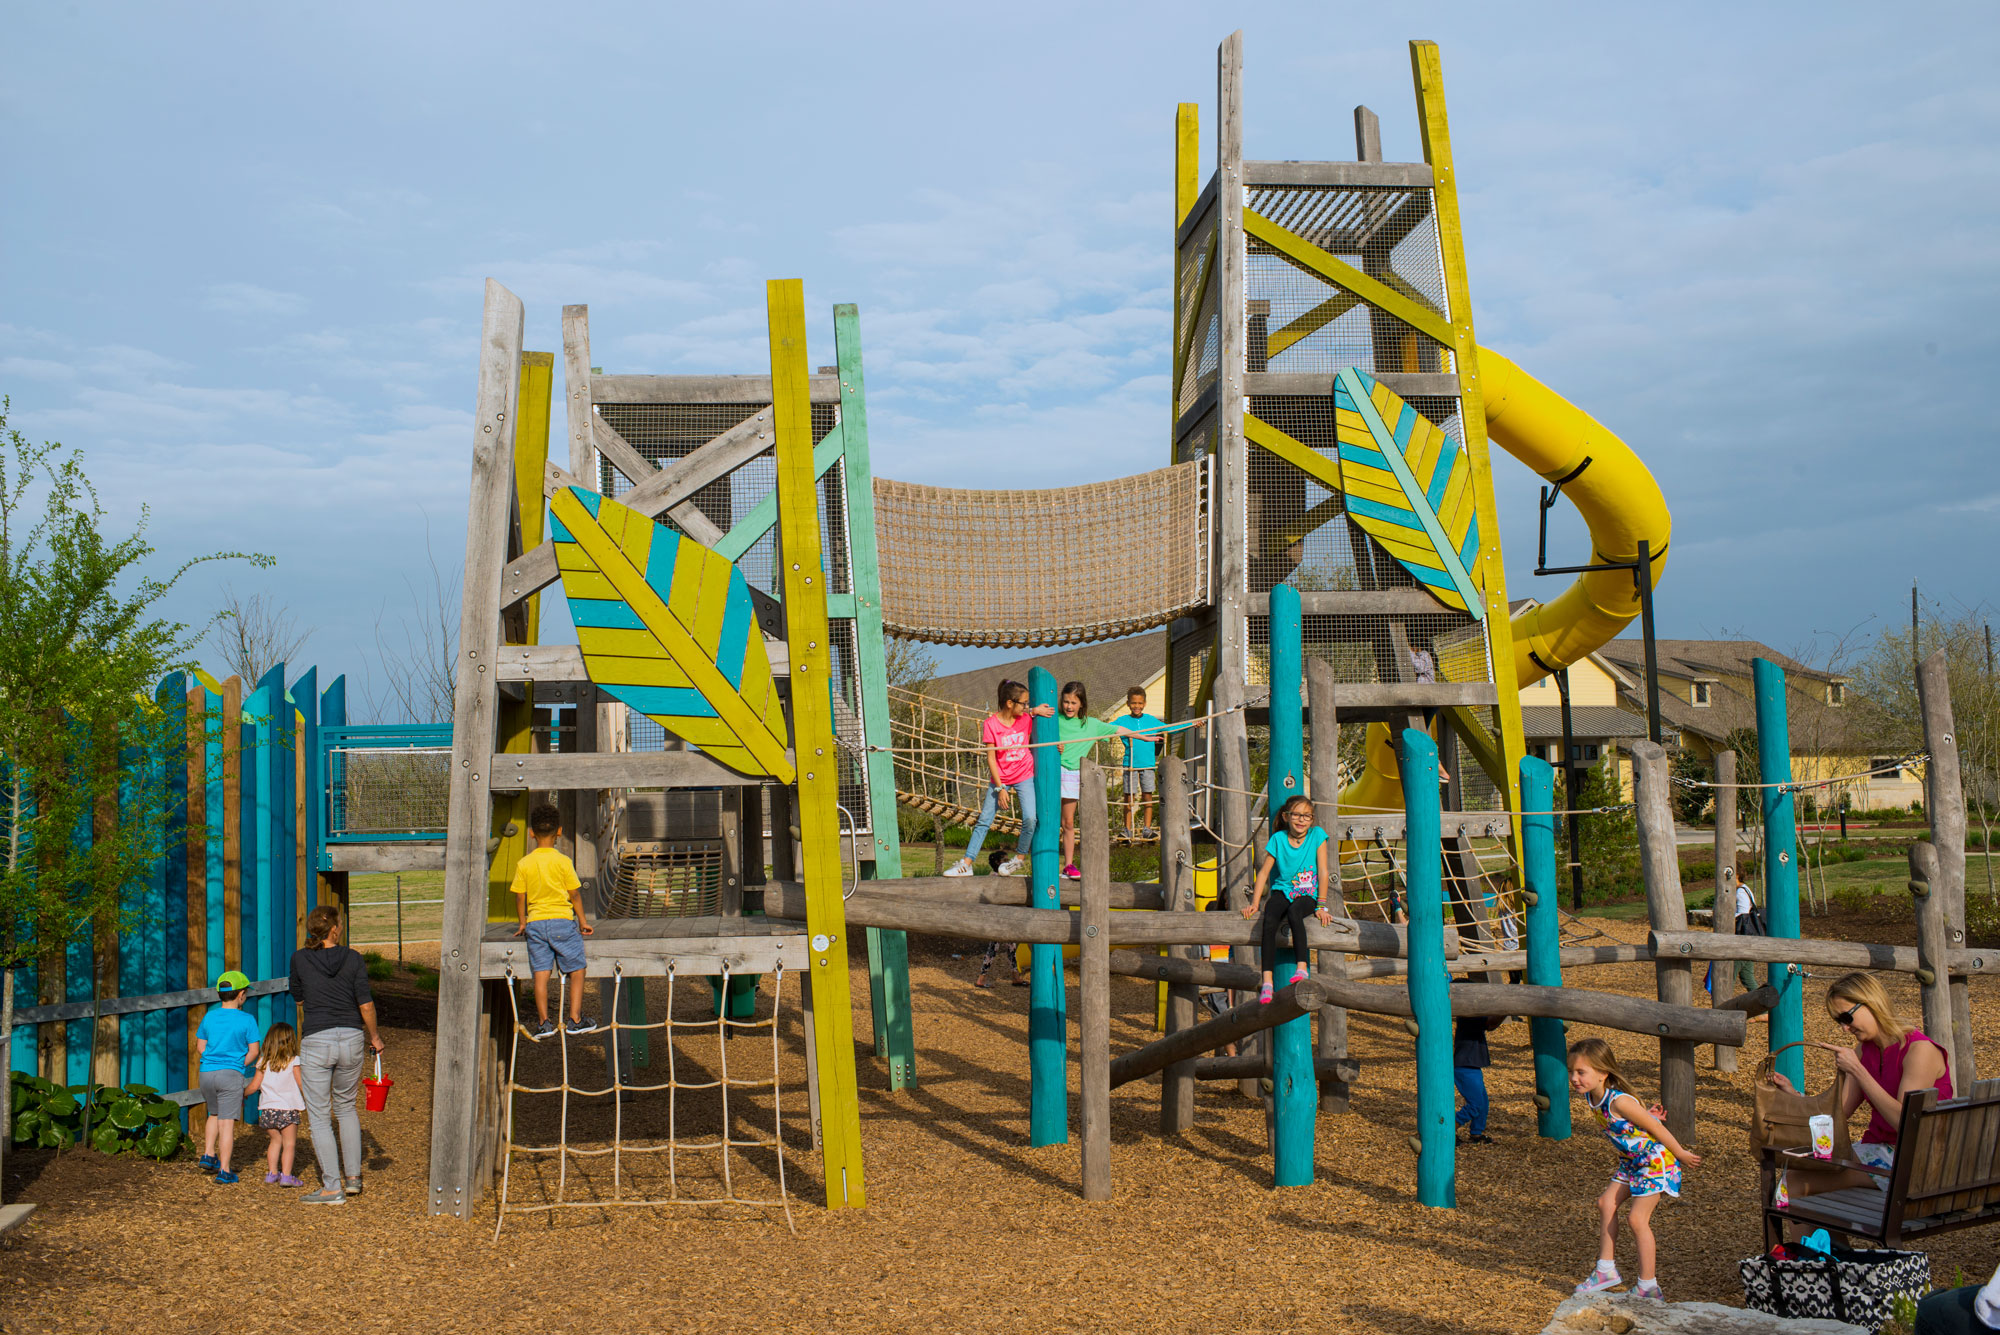 More than 100 acres of parks & playgrounds in Sienna